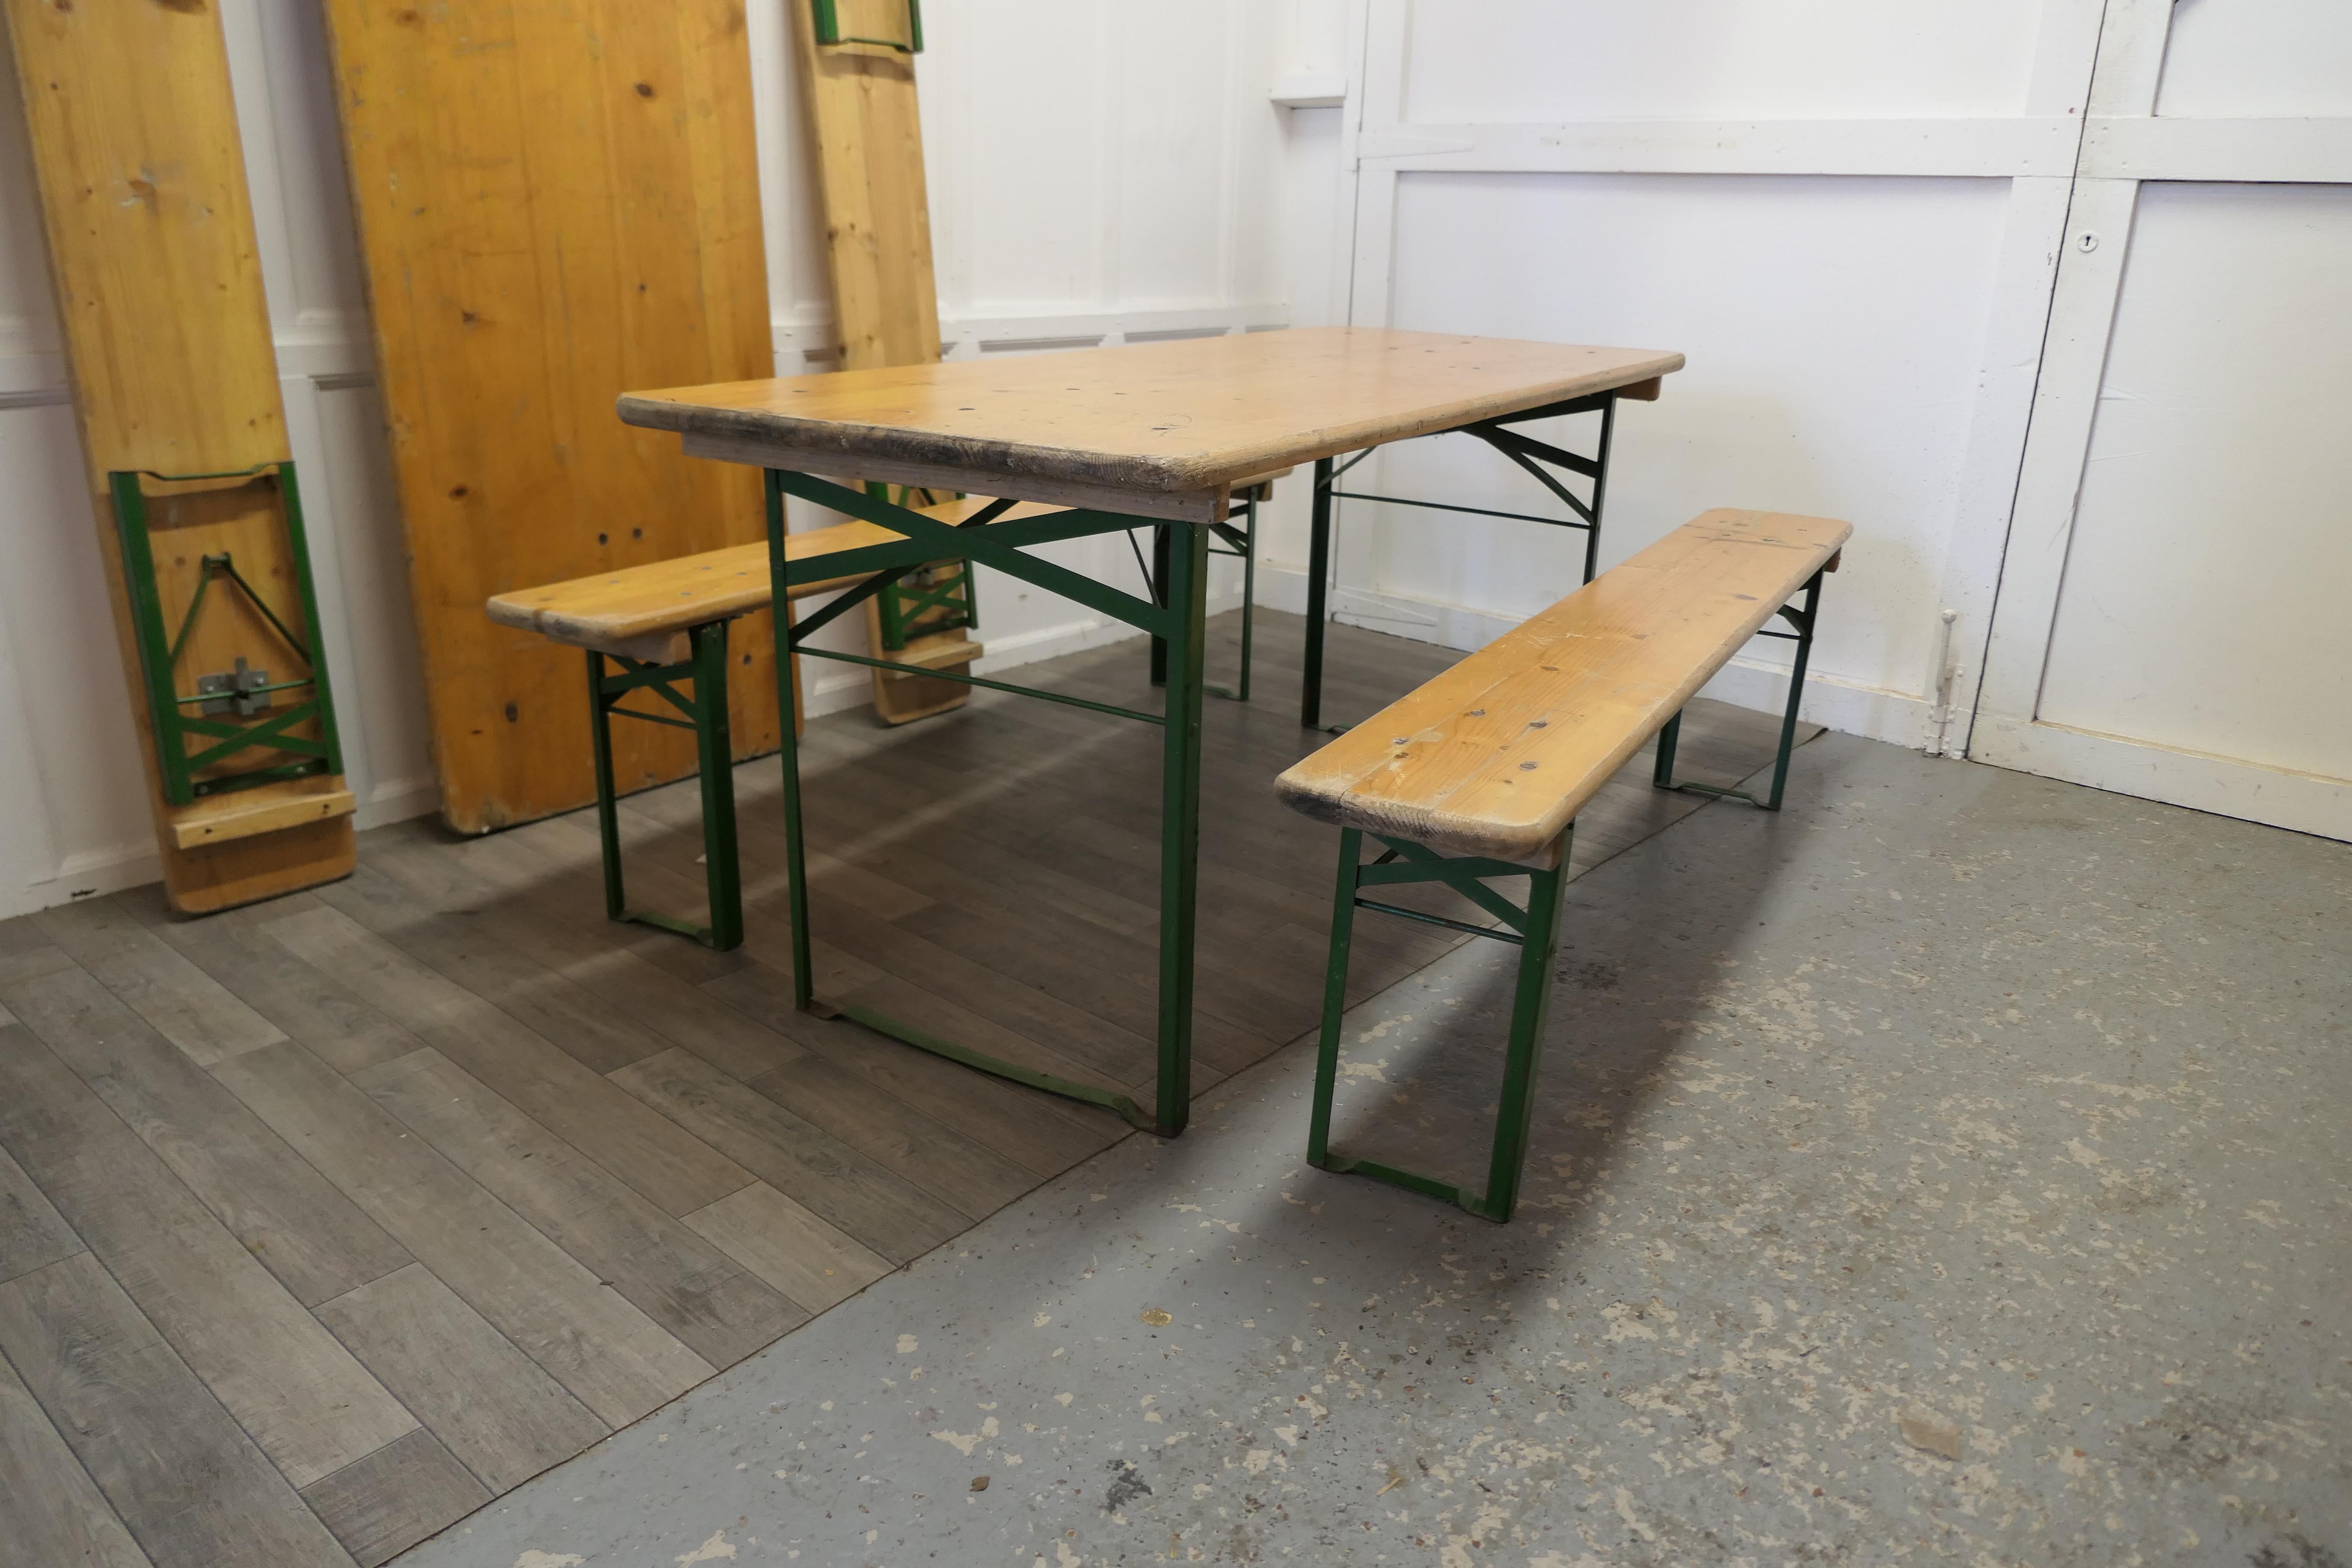 Set of 6ft pine picnic table and benches. 

We have 2 of these available if required 

This is a 6ft Long Picnic Table, the table top is made with 1” thick pine planks as are the 2 benches, they all have sturdy iron legs, painted in green tucked